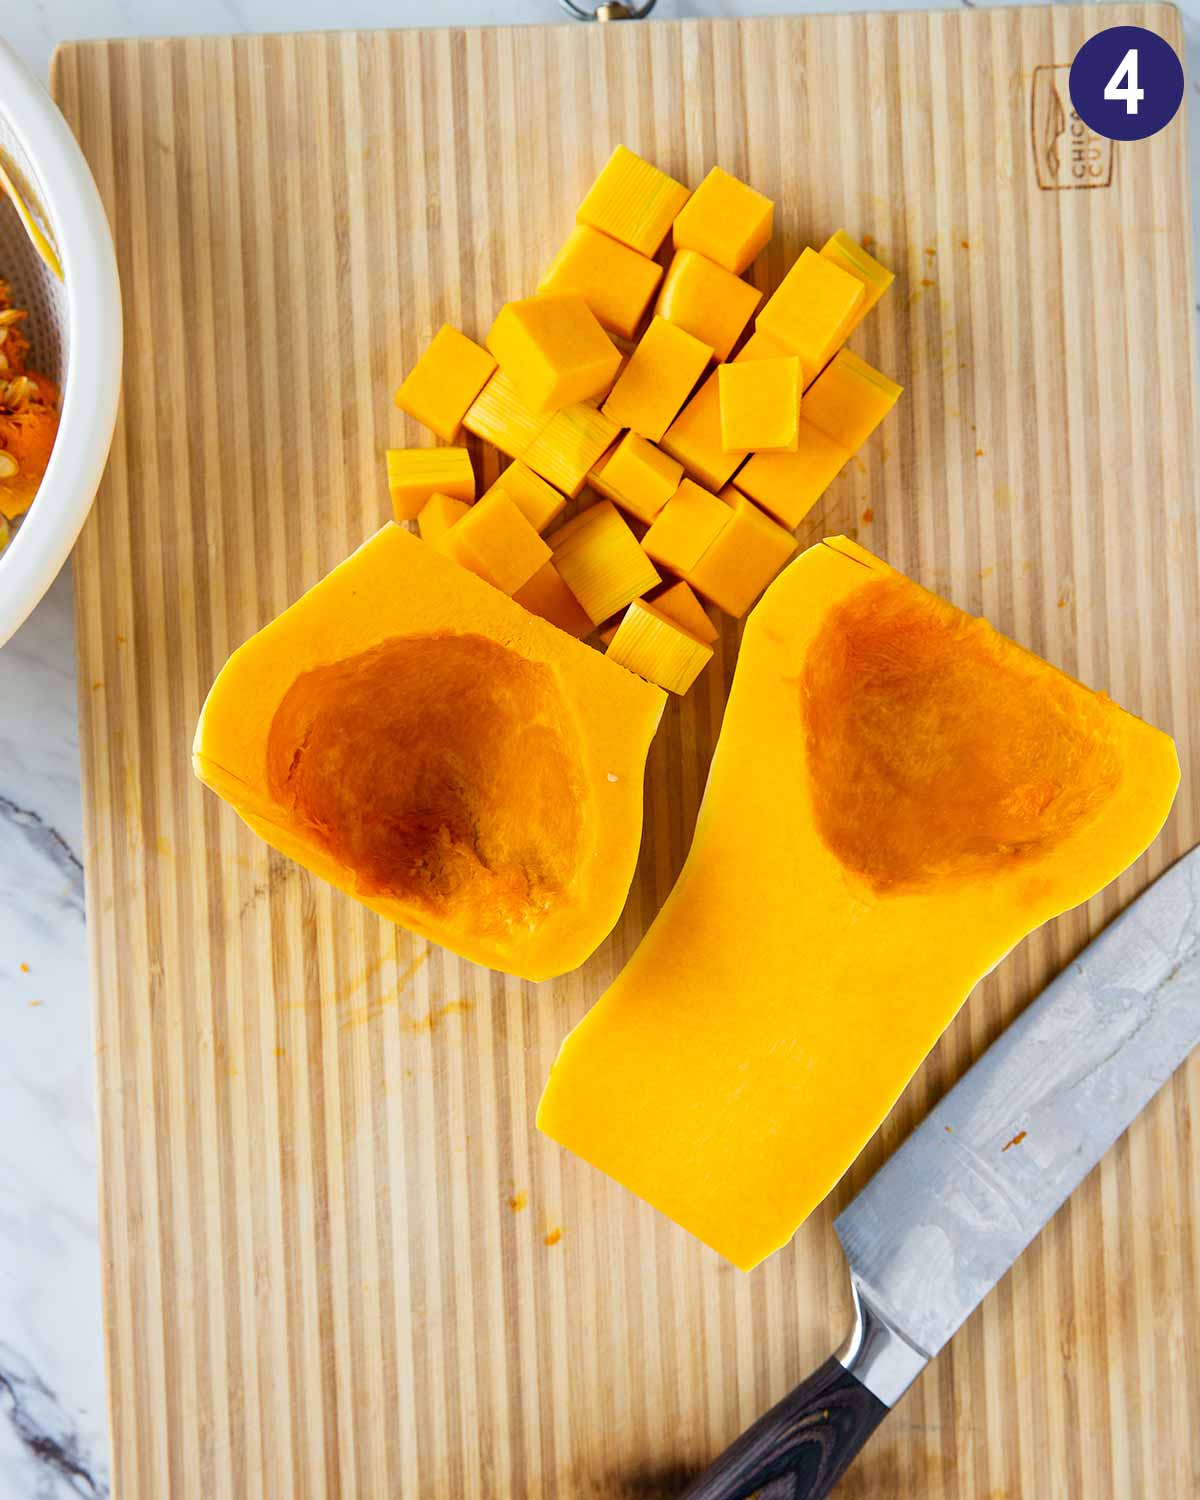 Image shows process of cutting butternut squash into cubes on the wooden cutting board. 